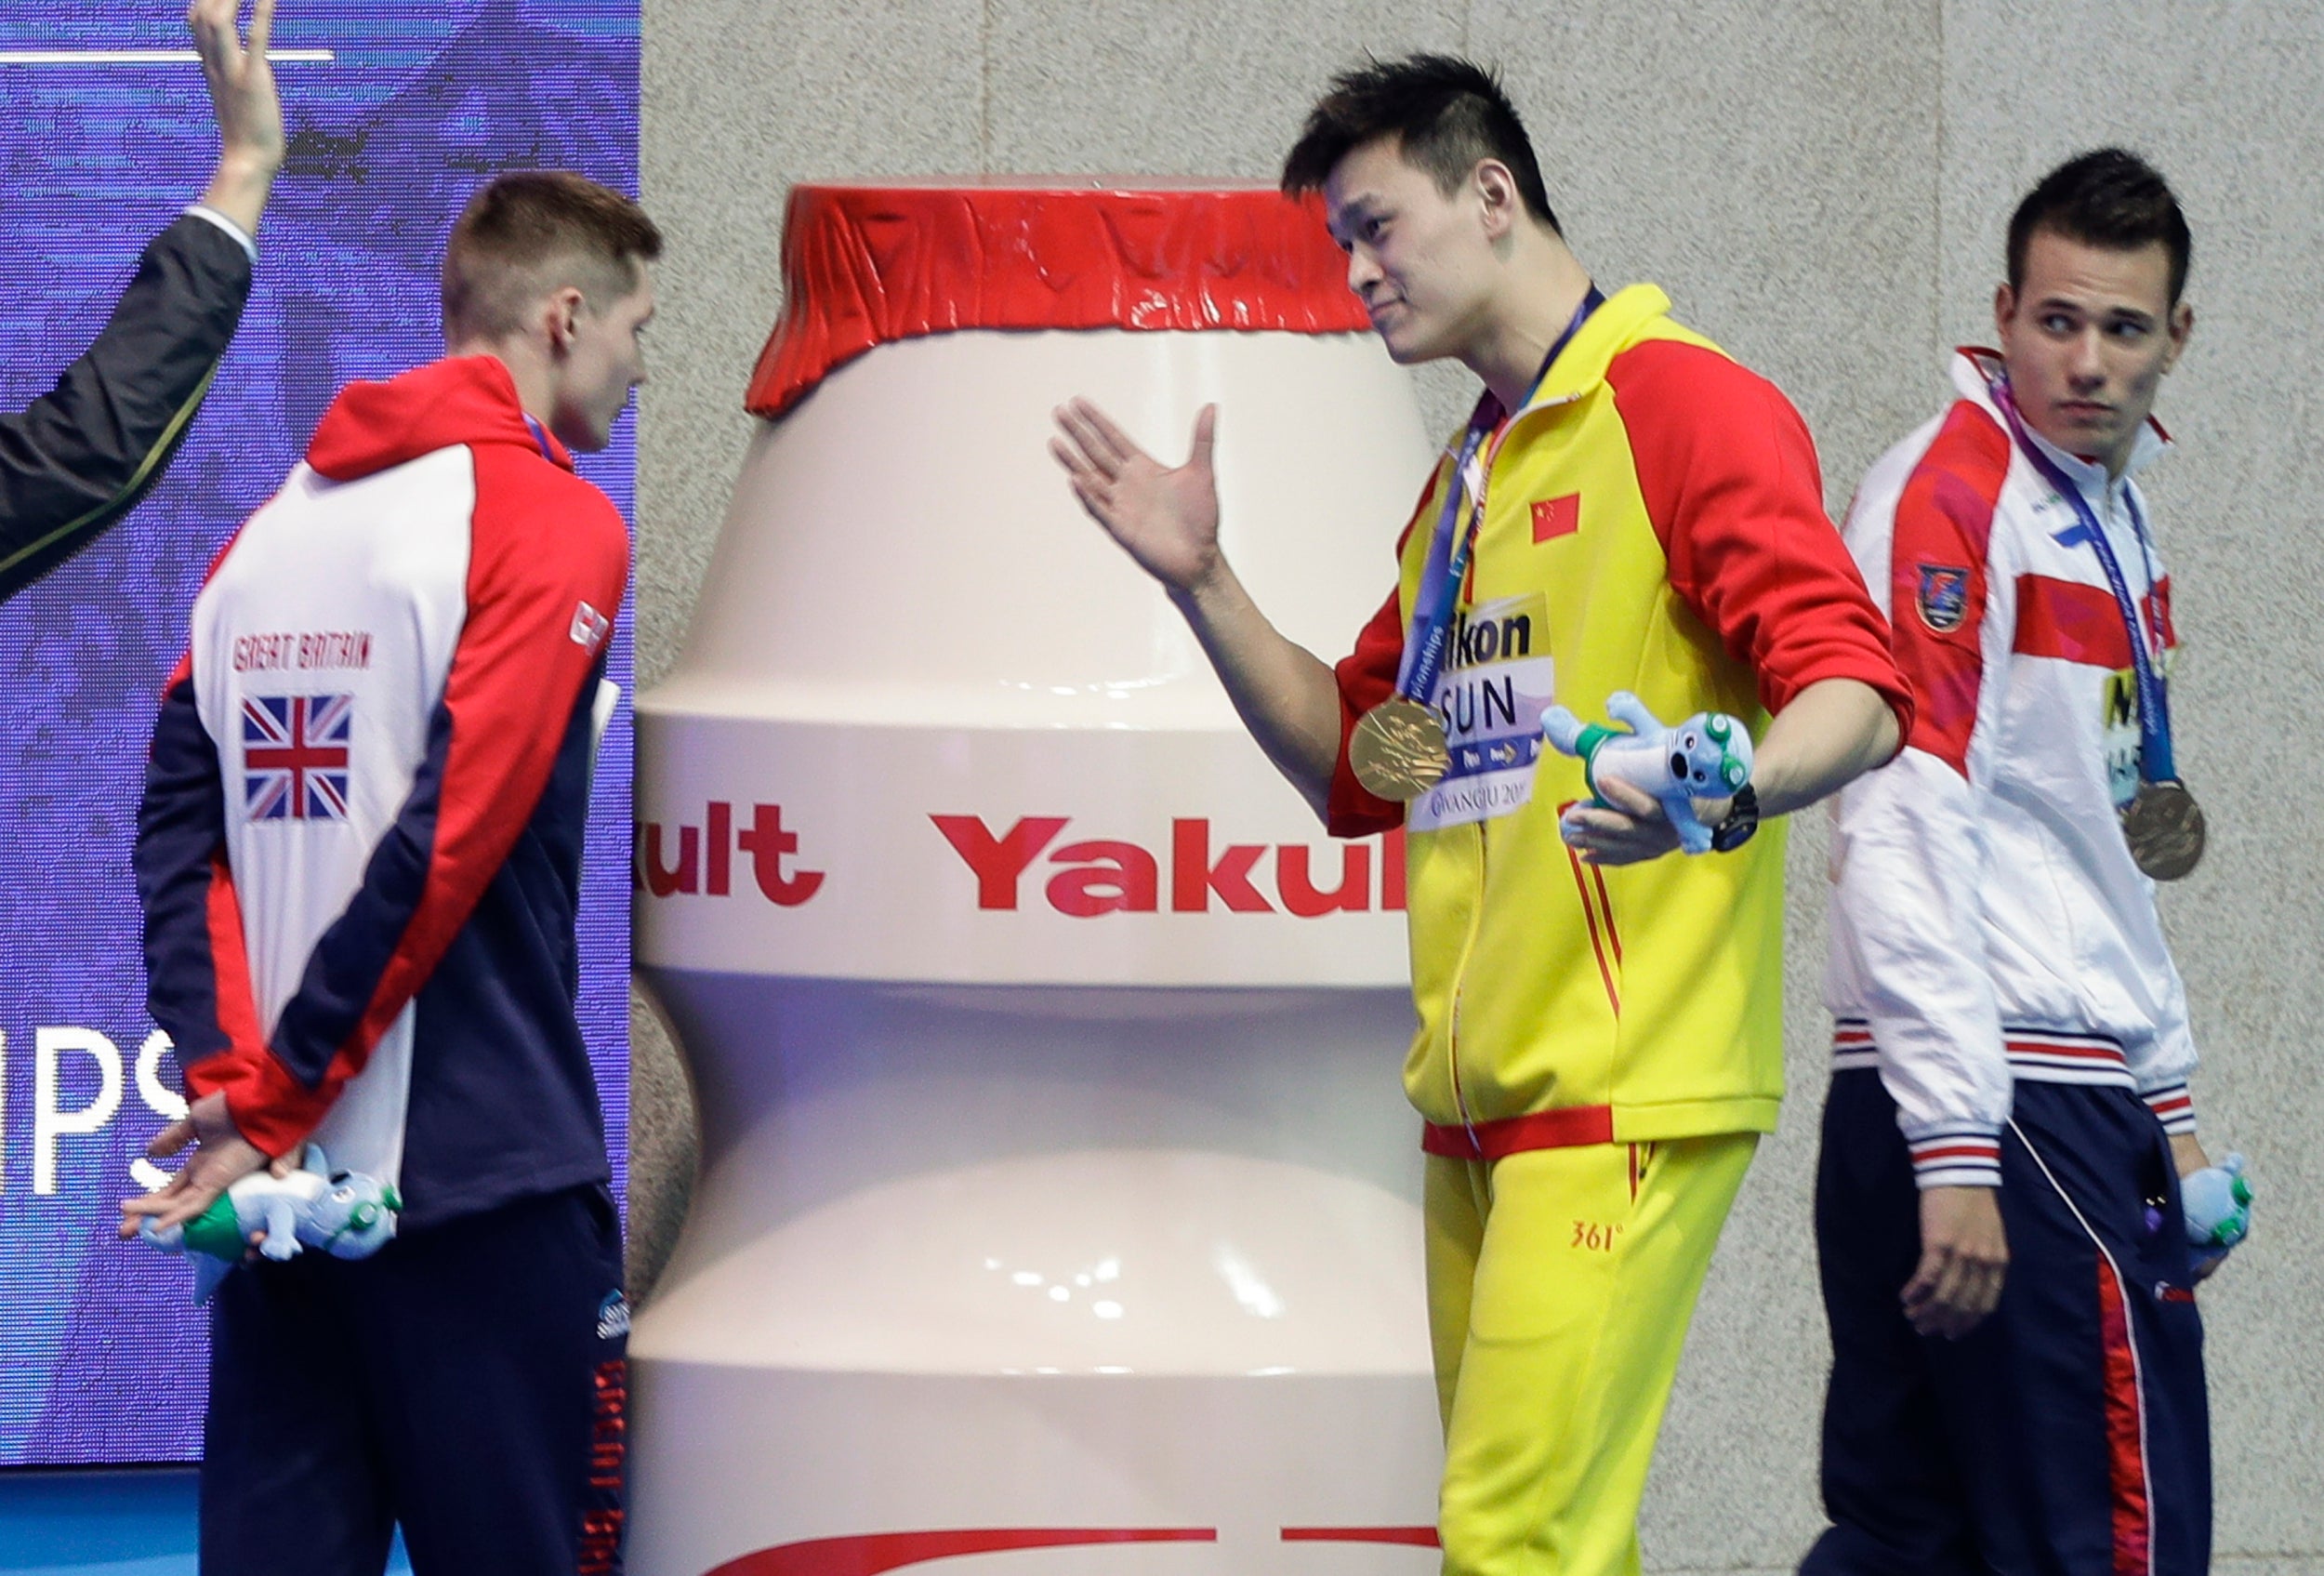 The Chinese star clashed with Team GB swimmer Duncan Scott